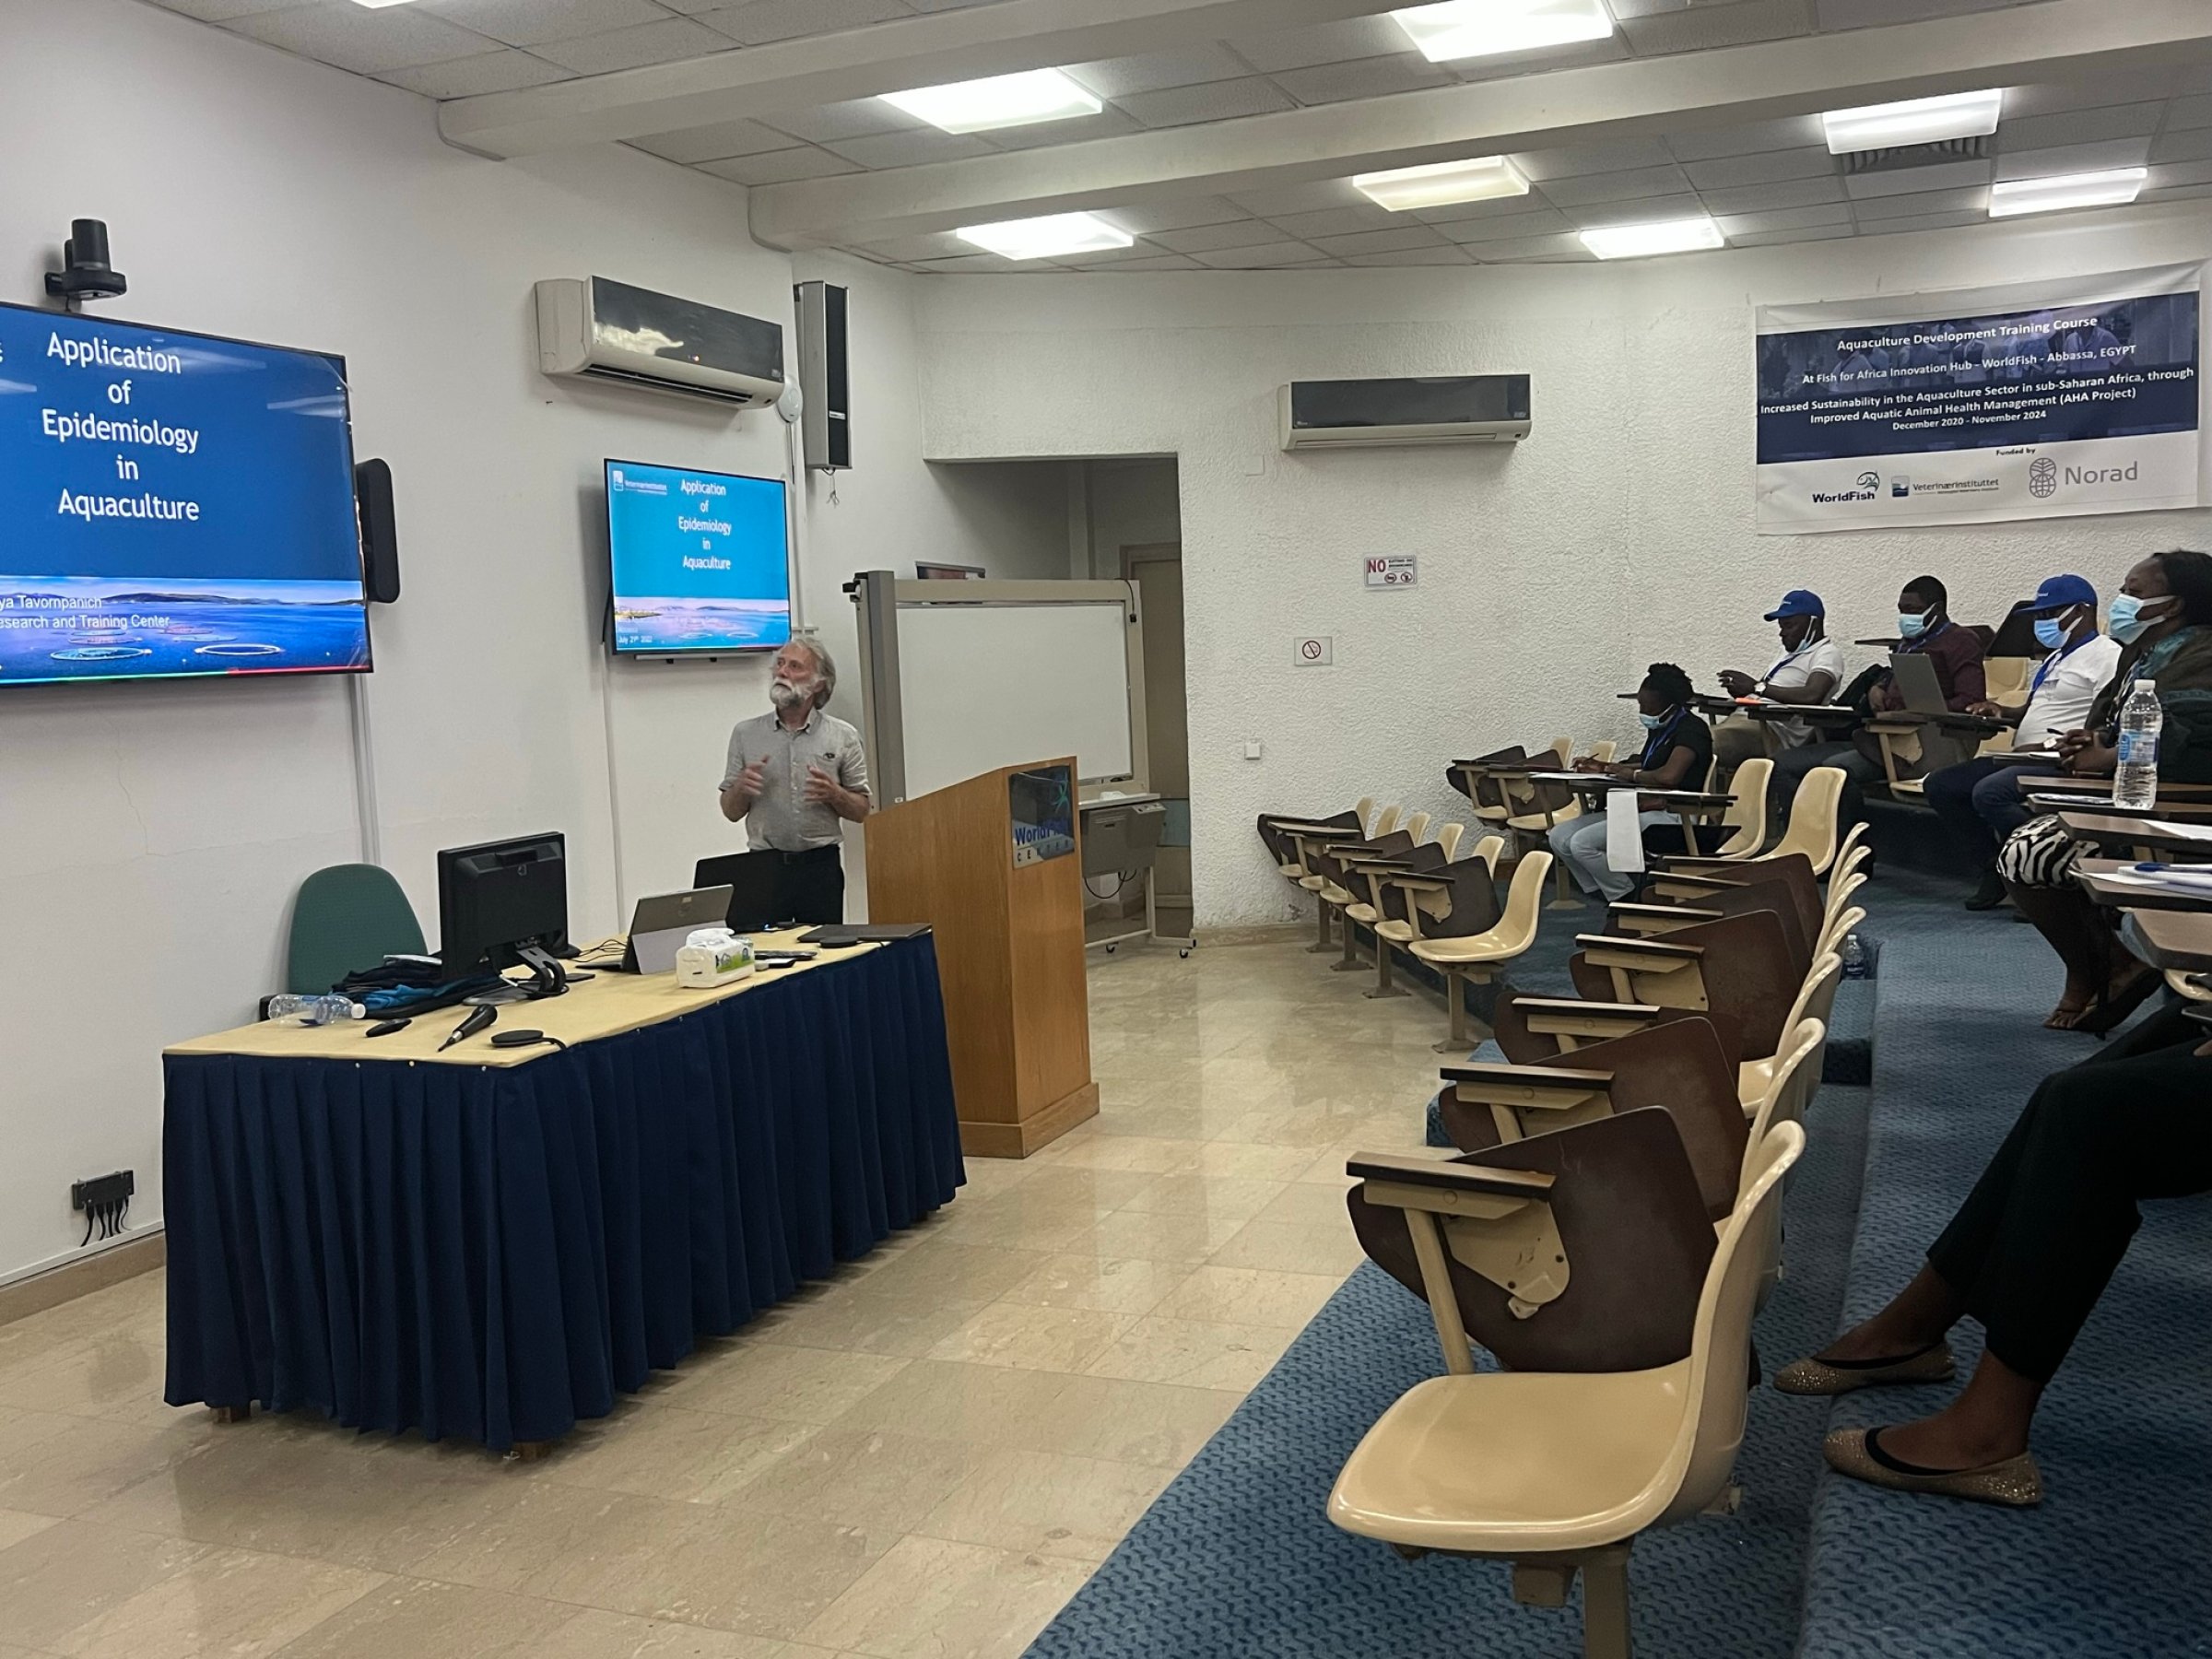 Here, Edgar Brun, Director of Aquatic Animal Health and Welfare at the NVI, presents application of epidemiology in aquaculture. Photo: Jacob Zornu